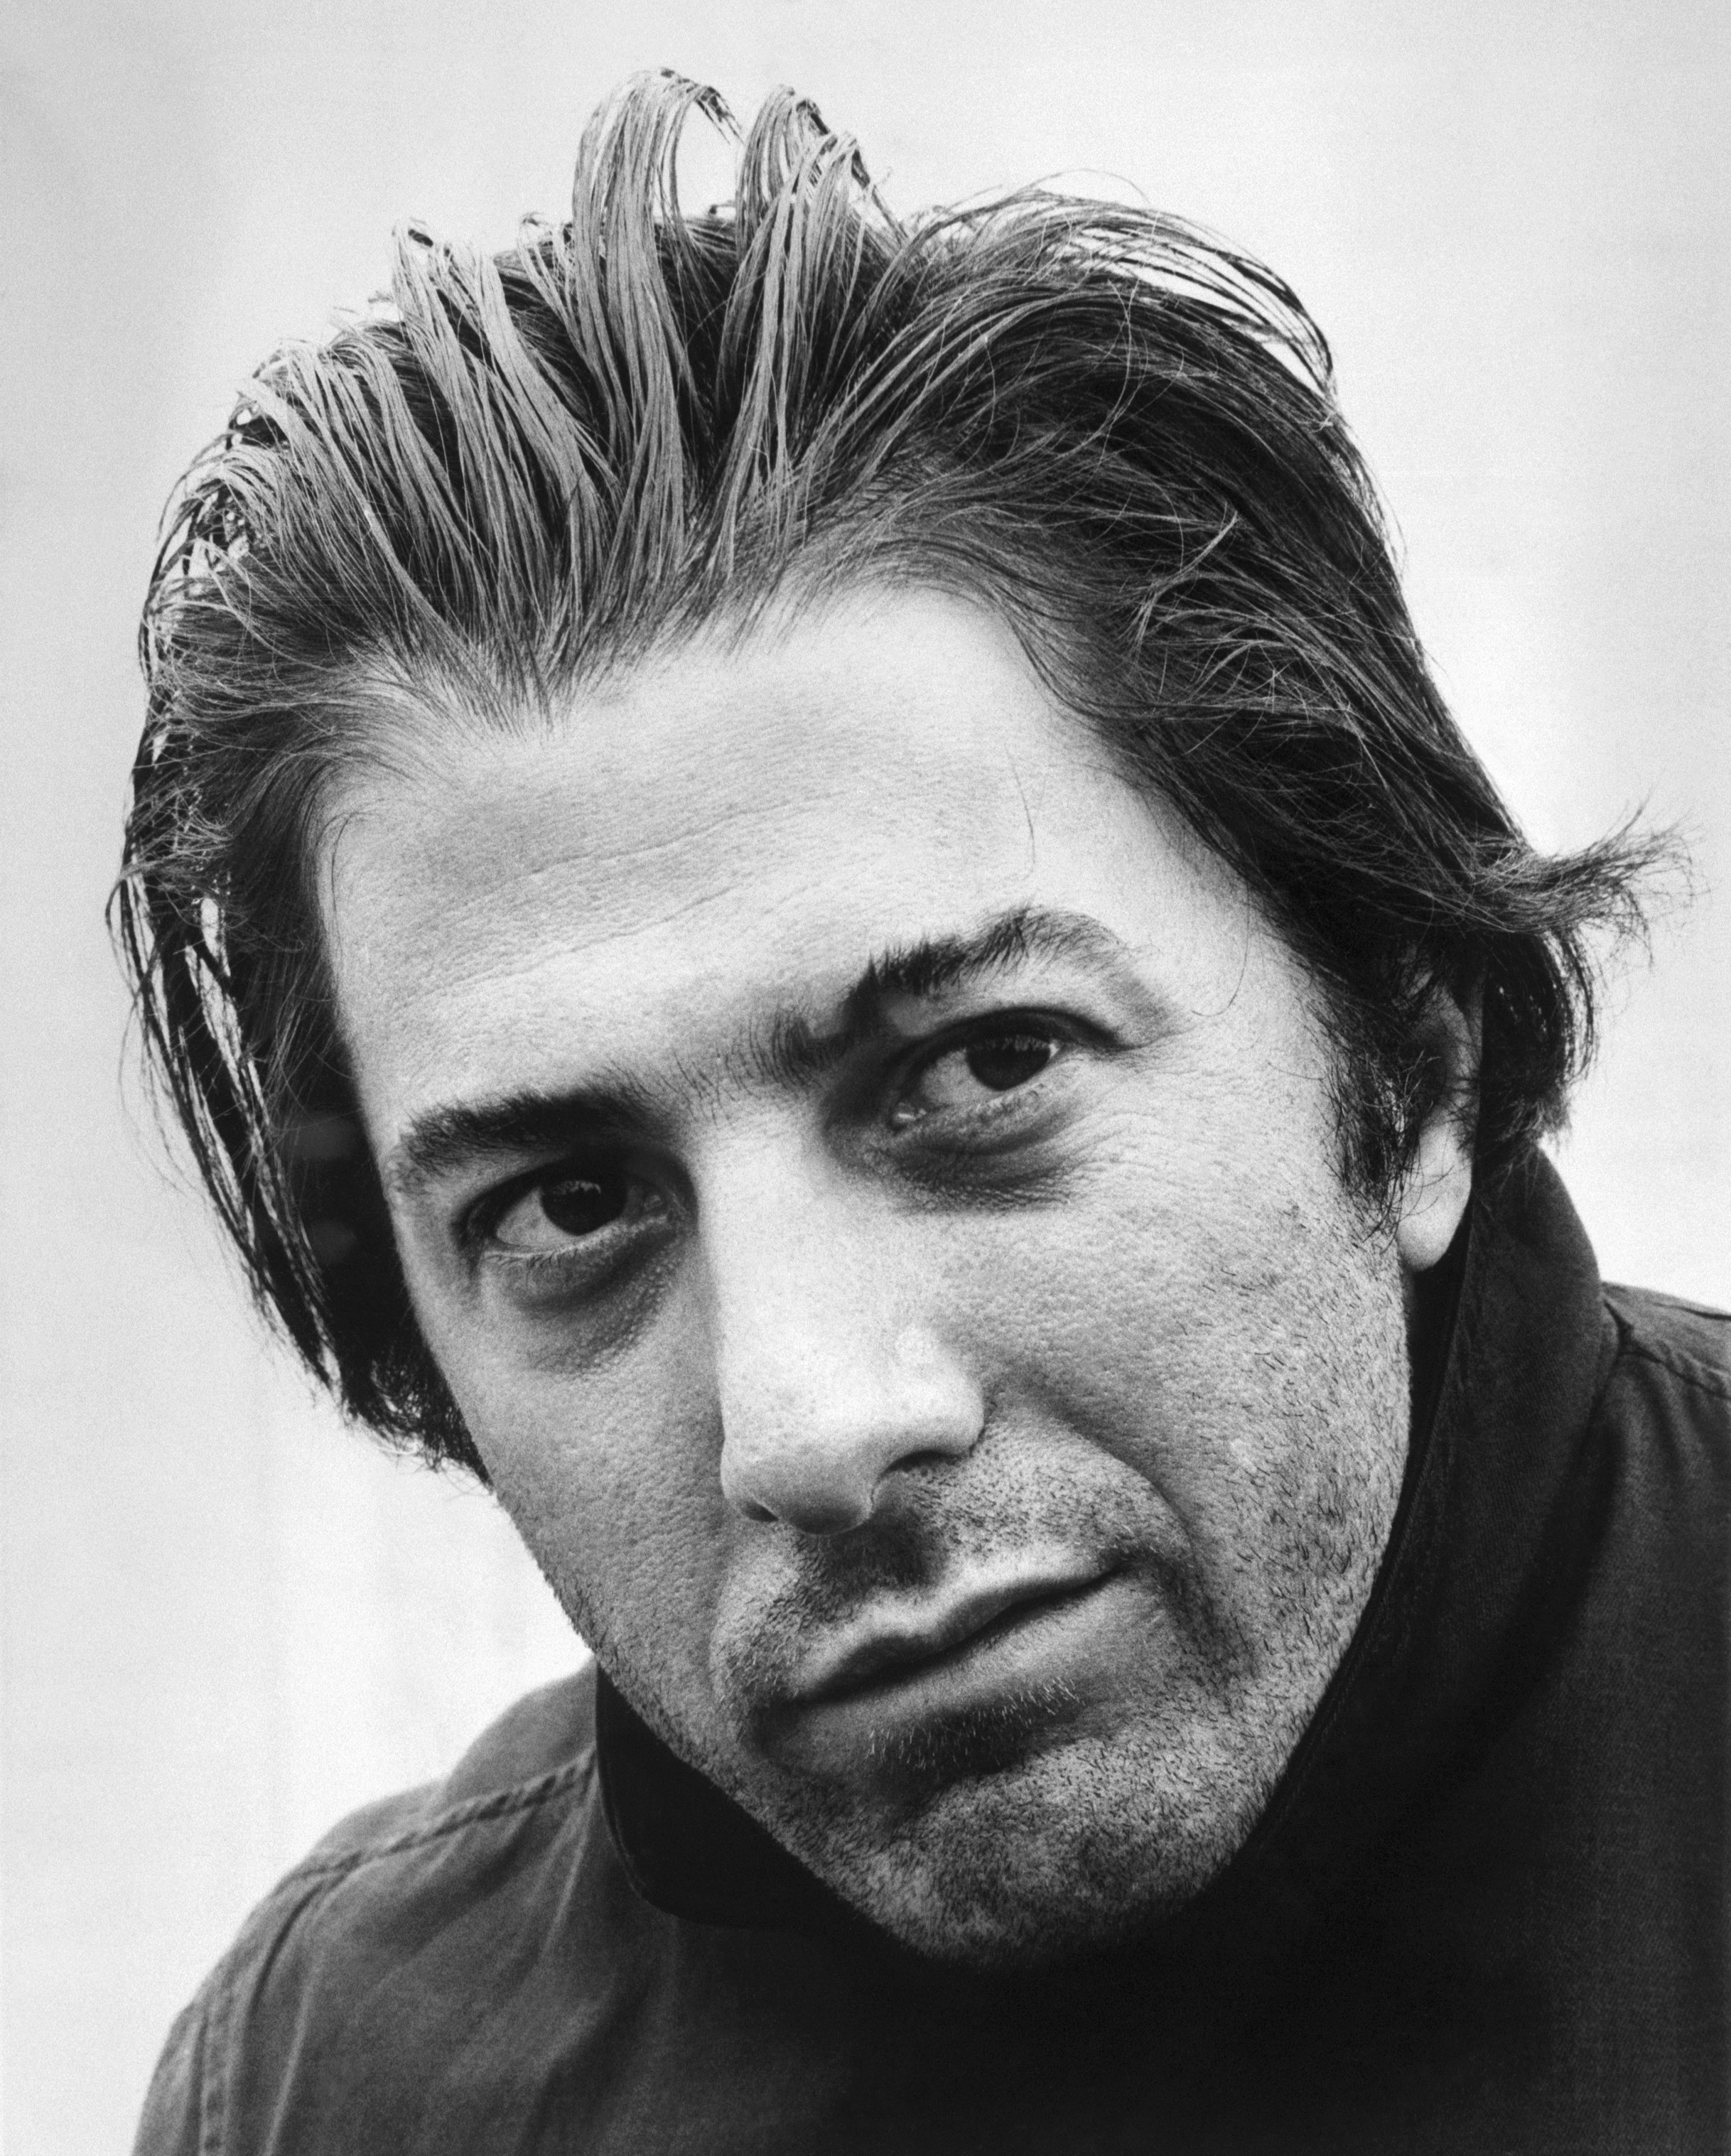  Dustin Hoffman starring as Ratso, a Bronx-born petty con man with a game leg in"Midnight Cowboy" in 1968 | Source: Getty Images